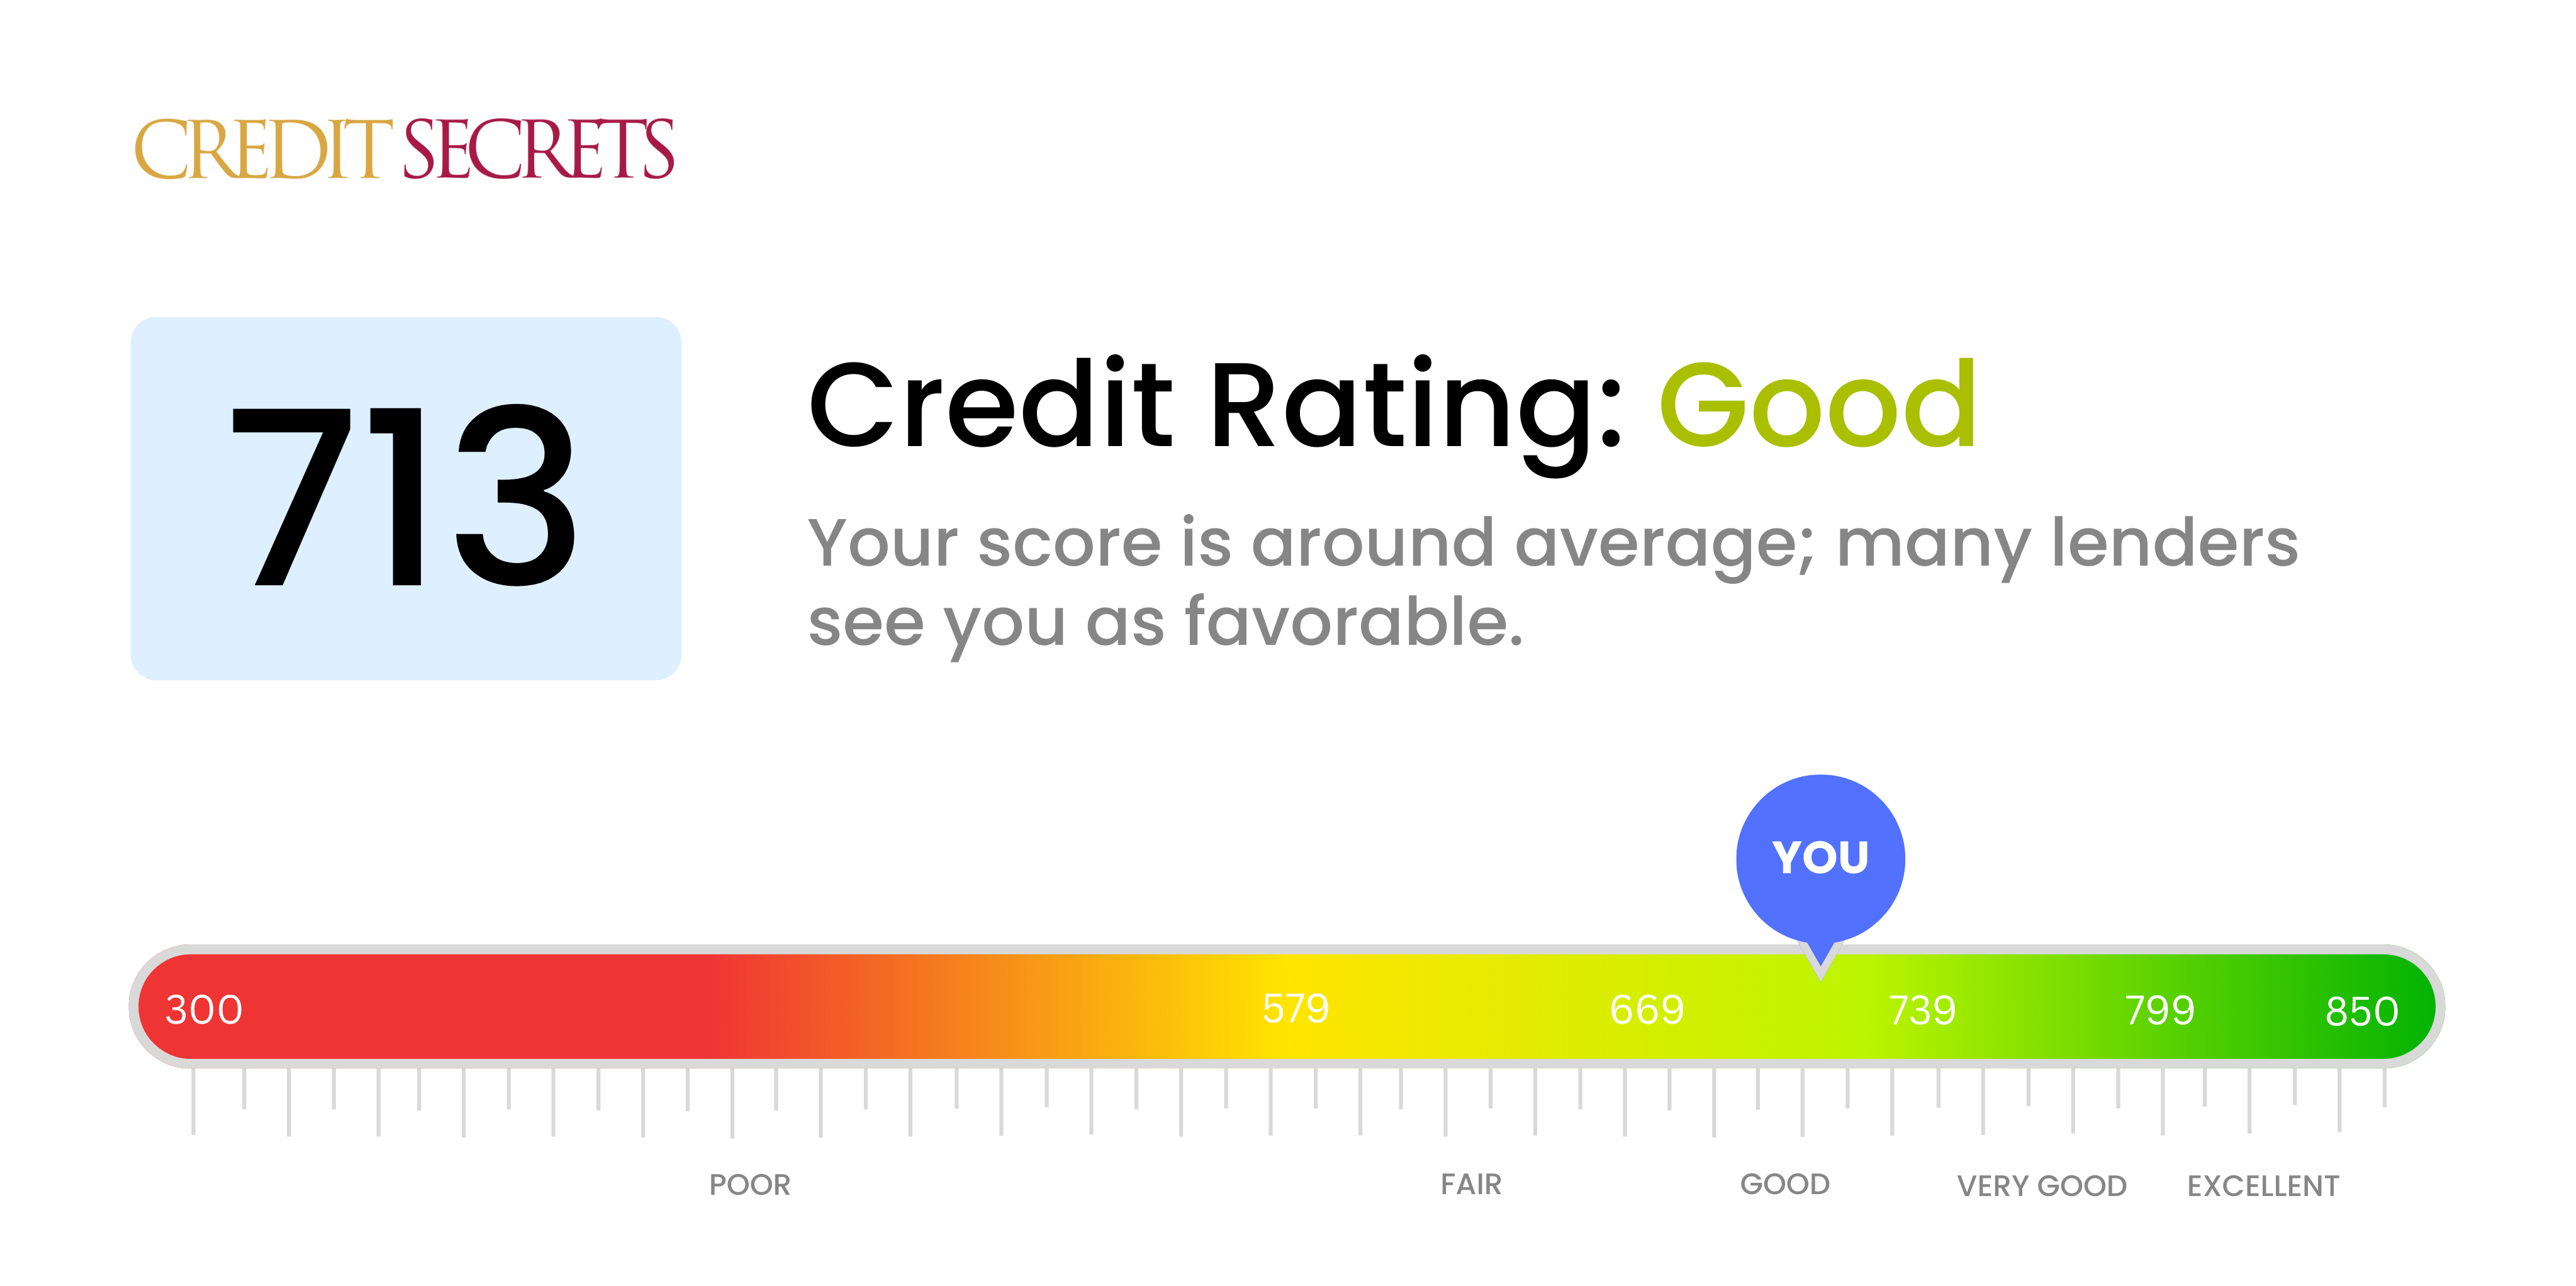 Is 713 a good credit score?